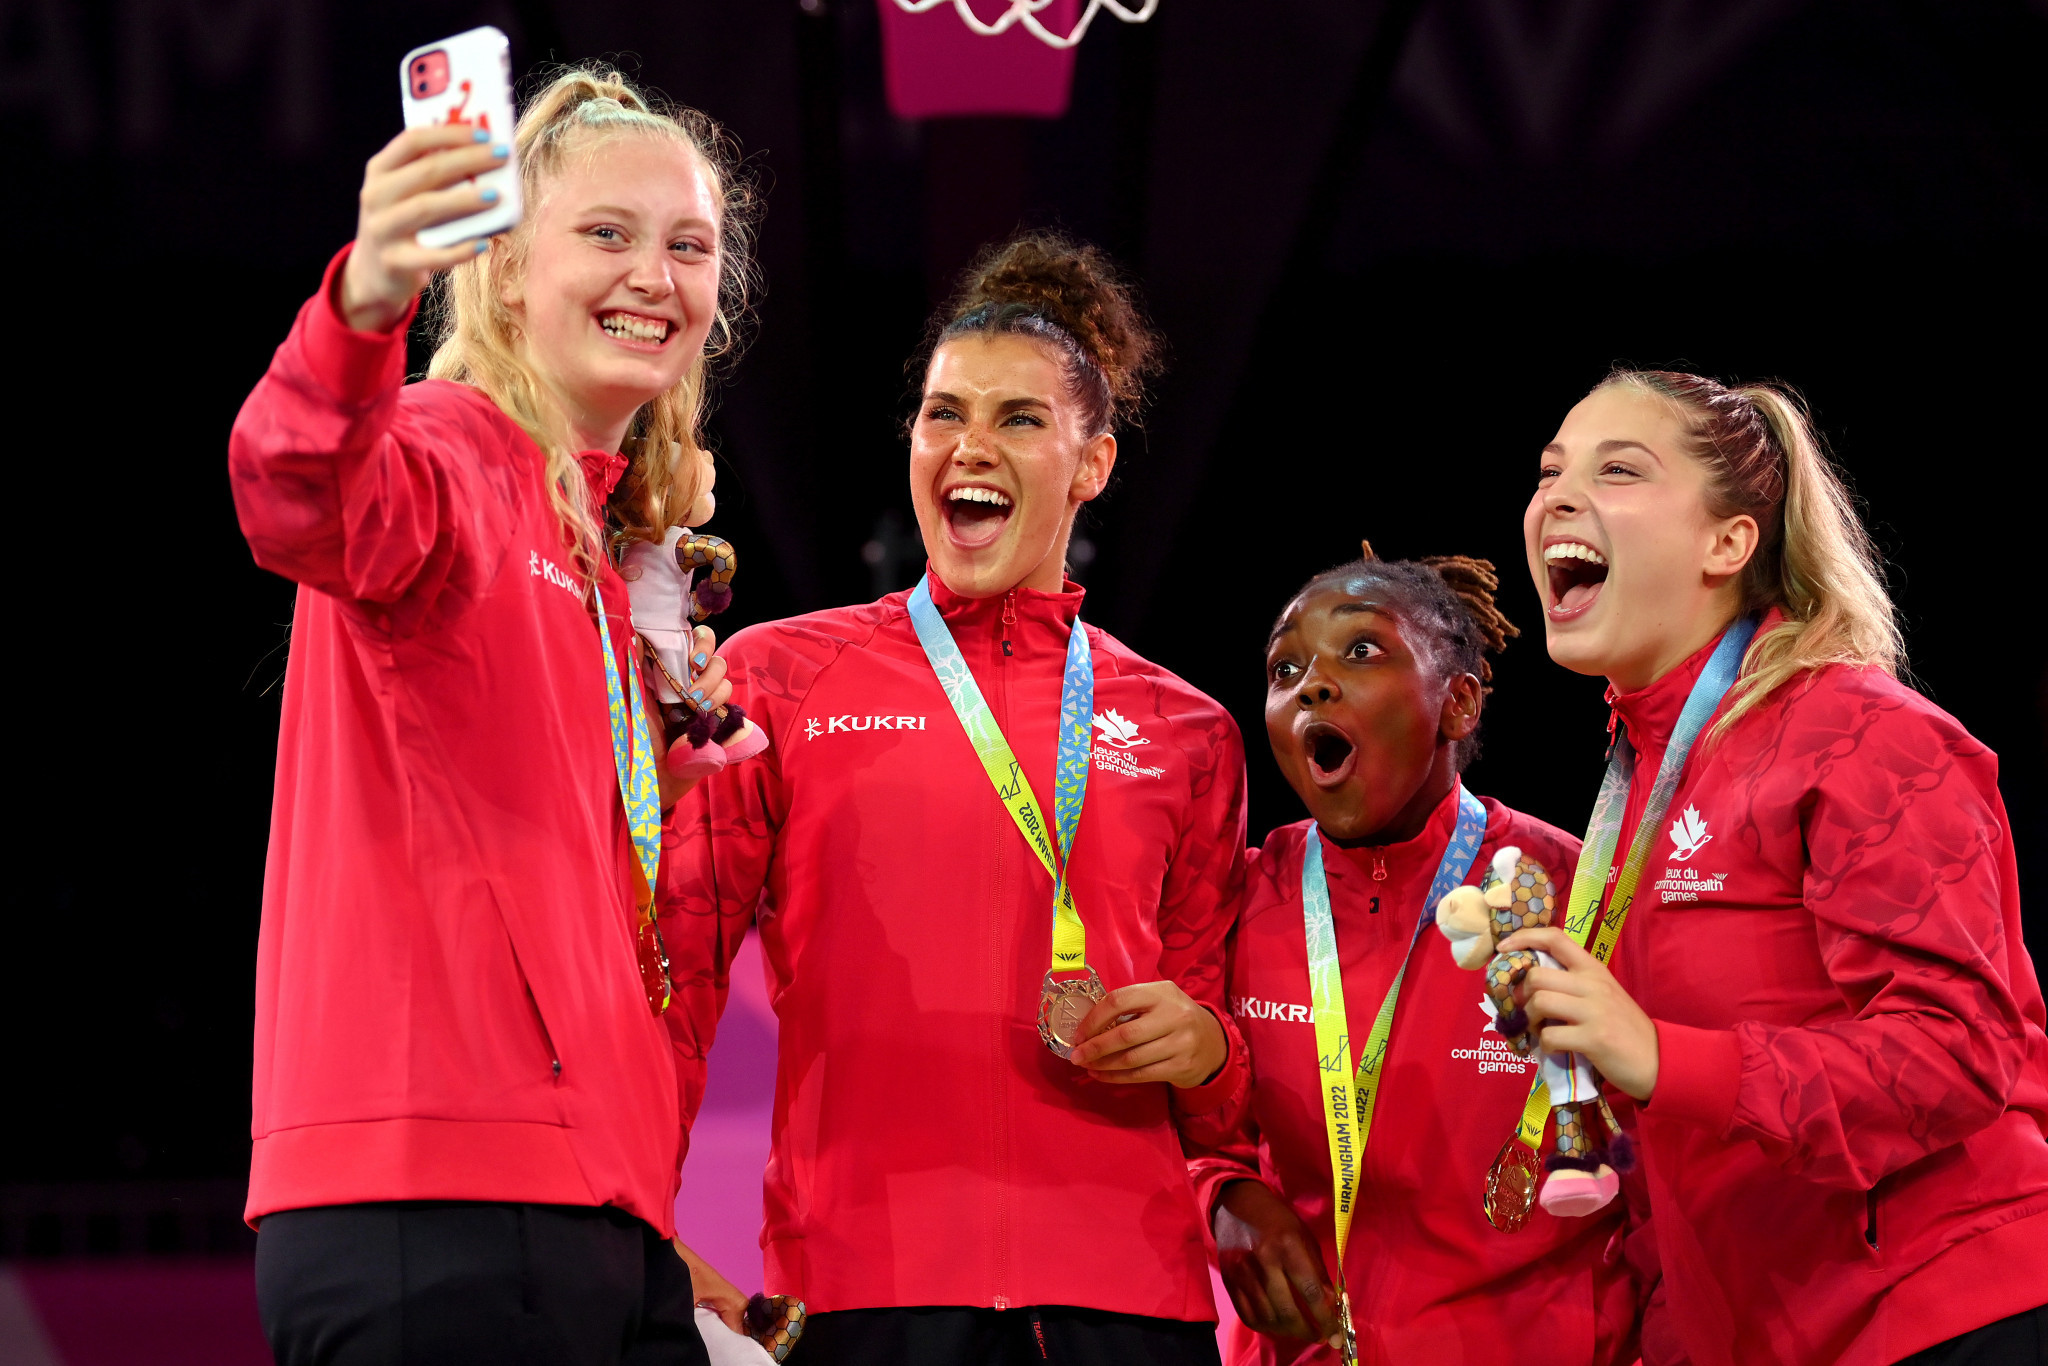 Canada won the women's 3x3 basketball tournament at Birmingham 2022 ©Getty Images